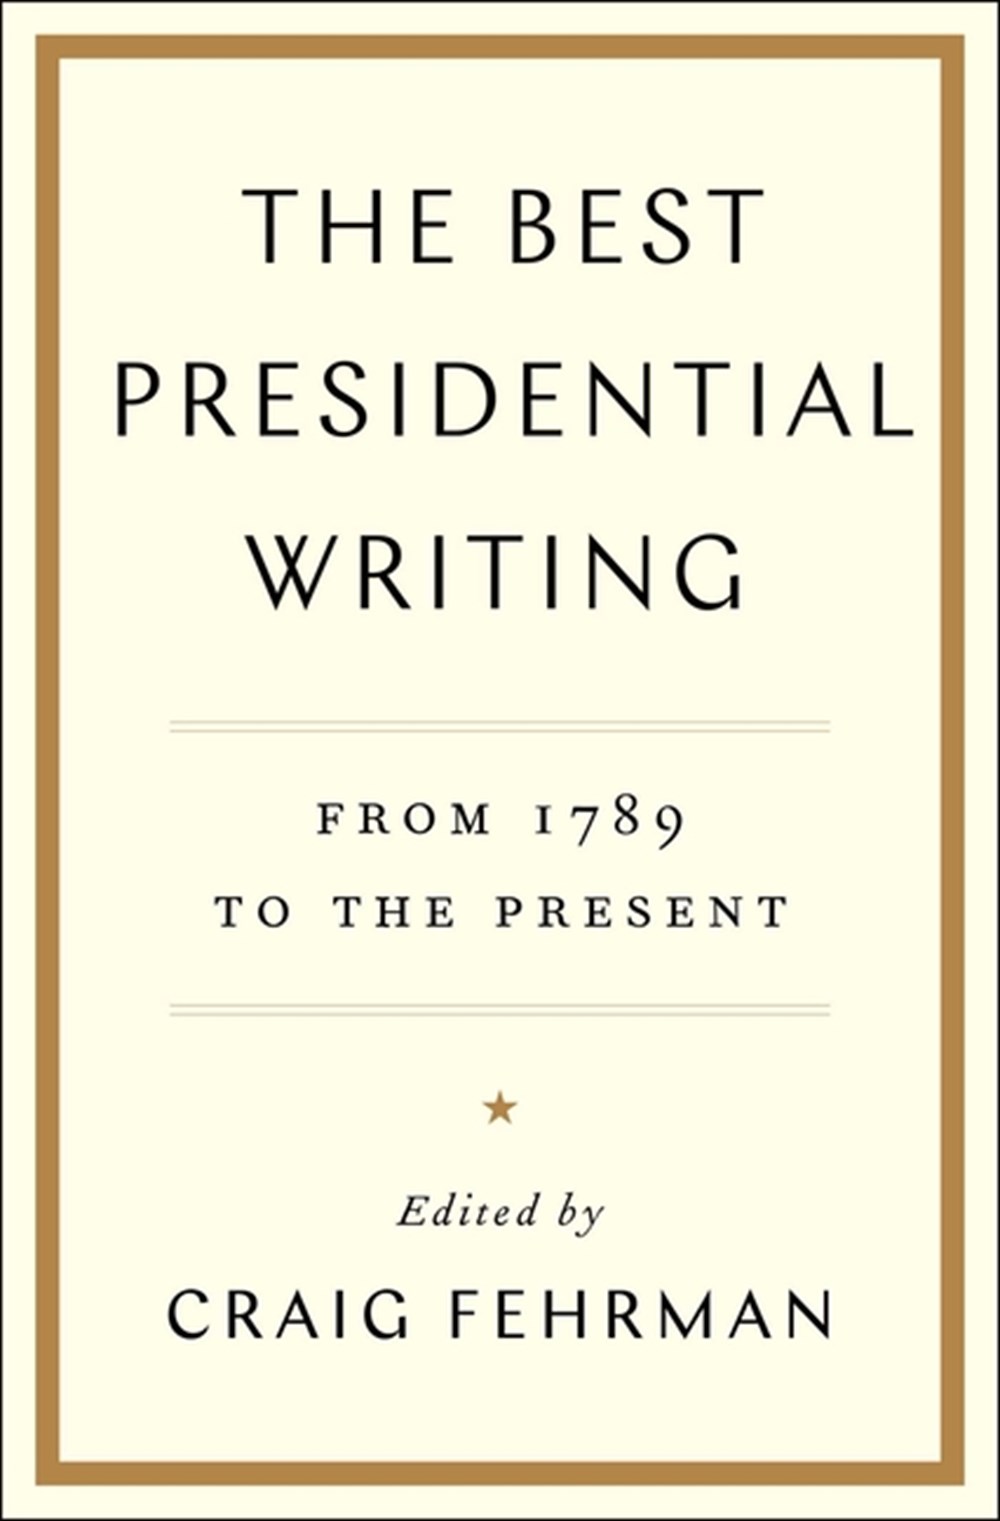 Best Presidential Writing From 1789 to the Present